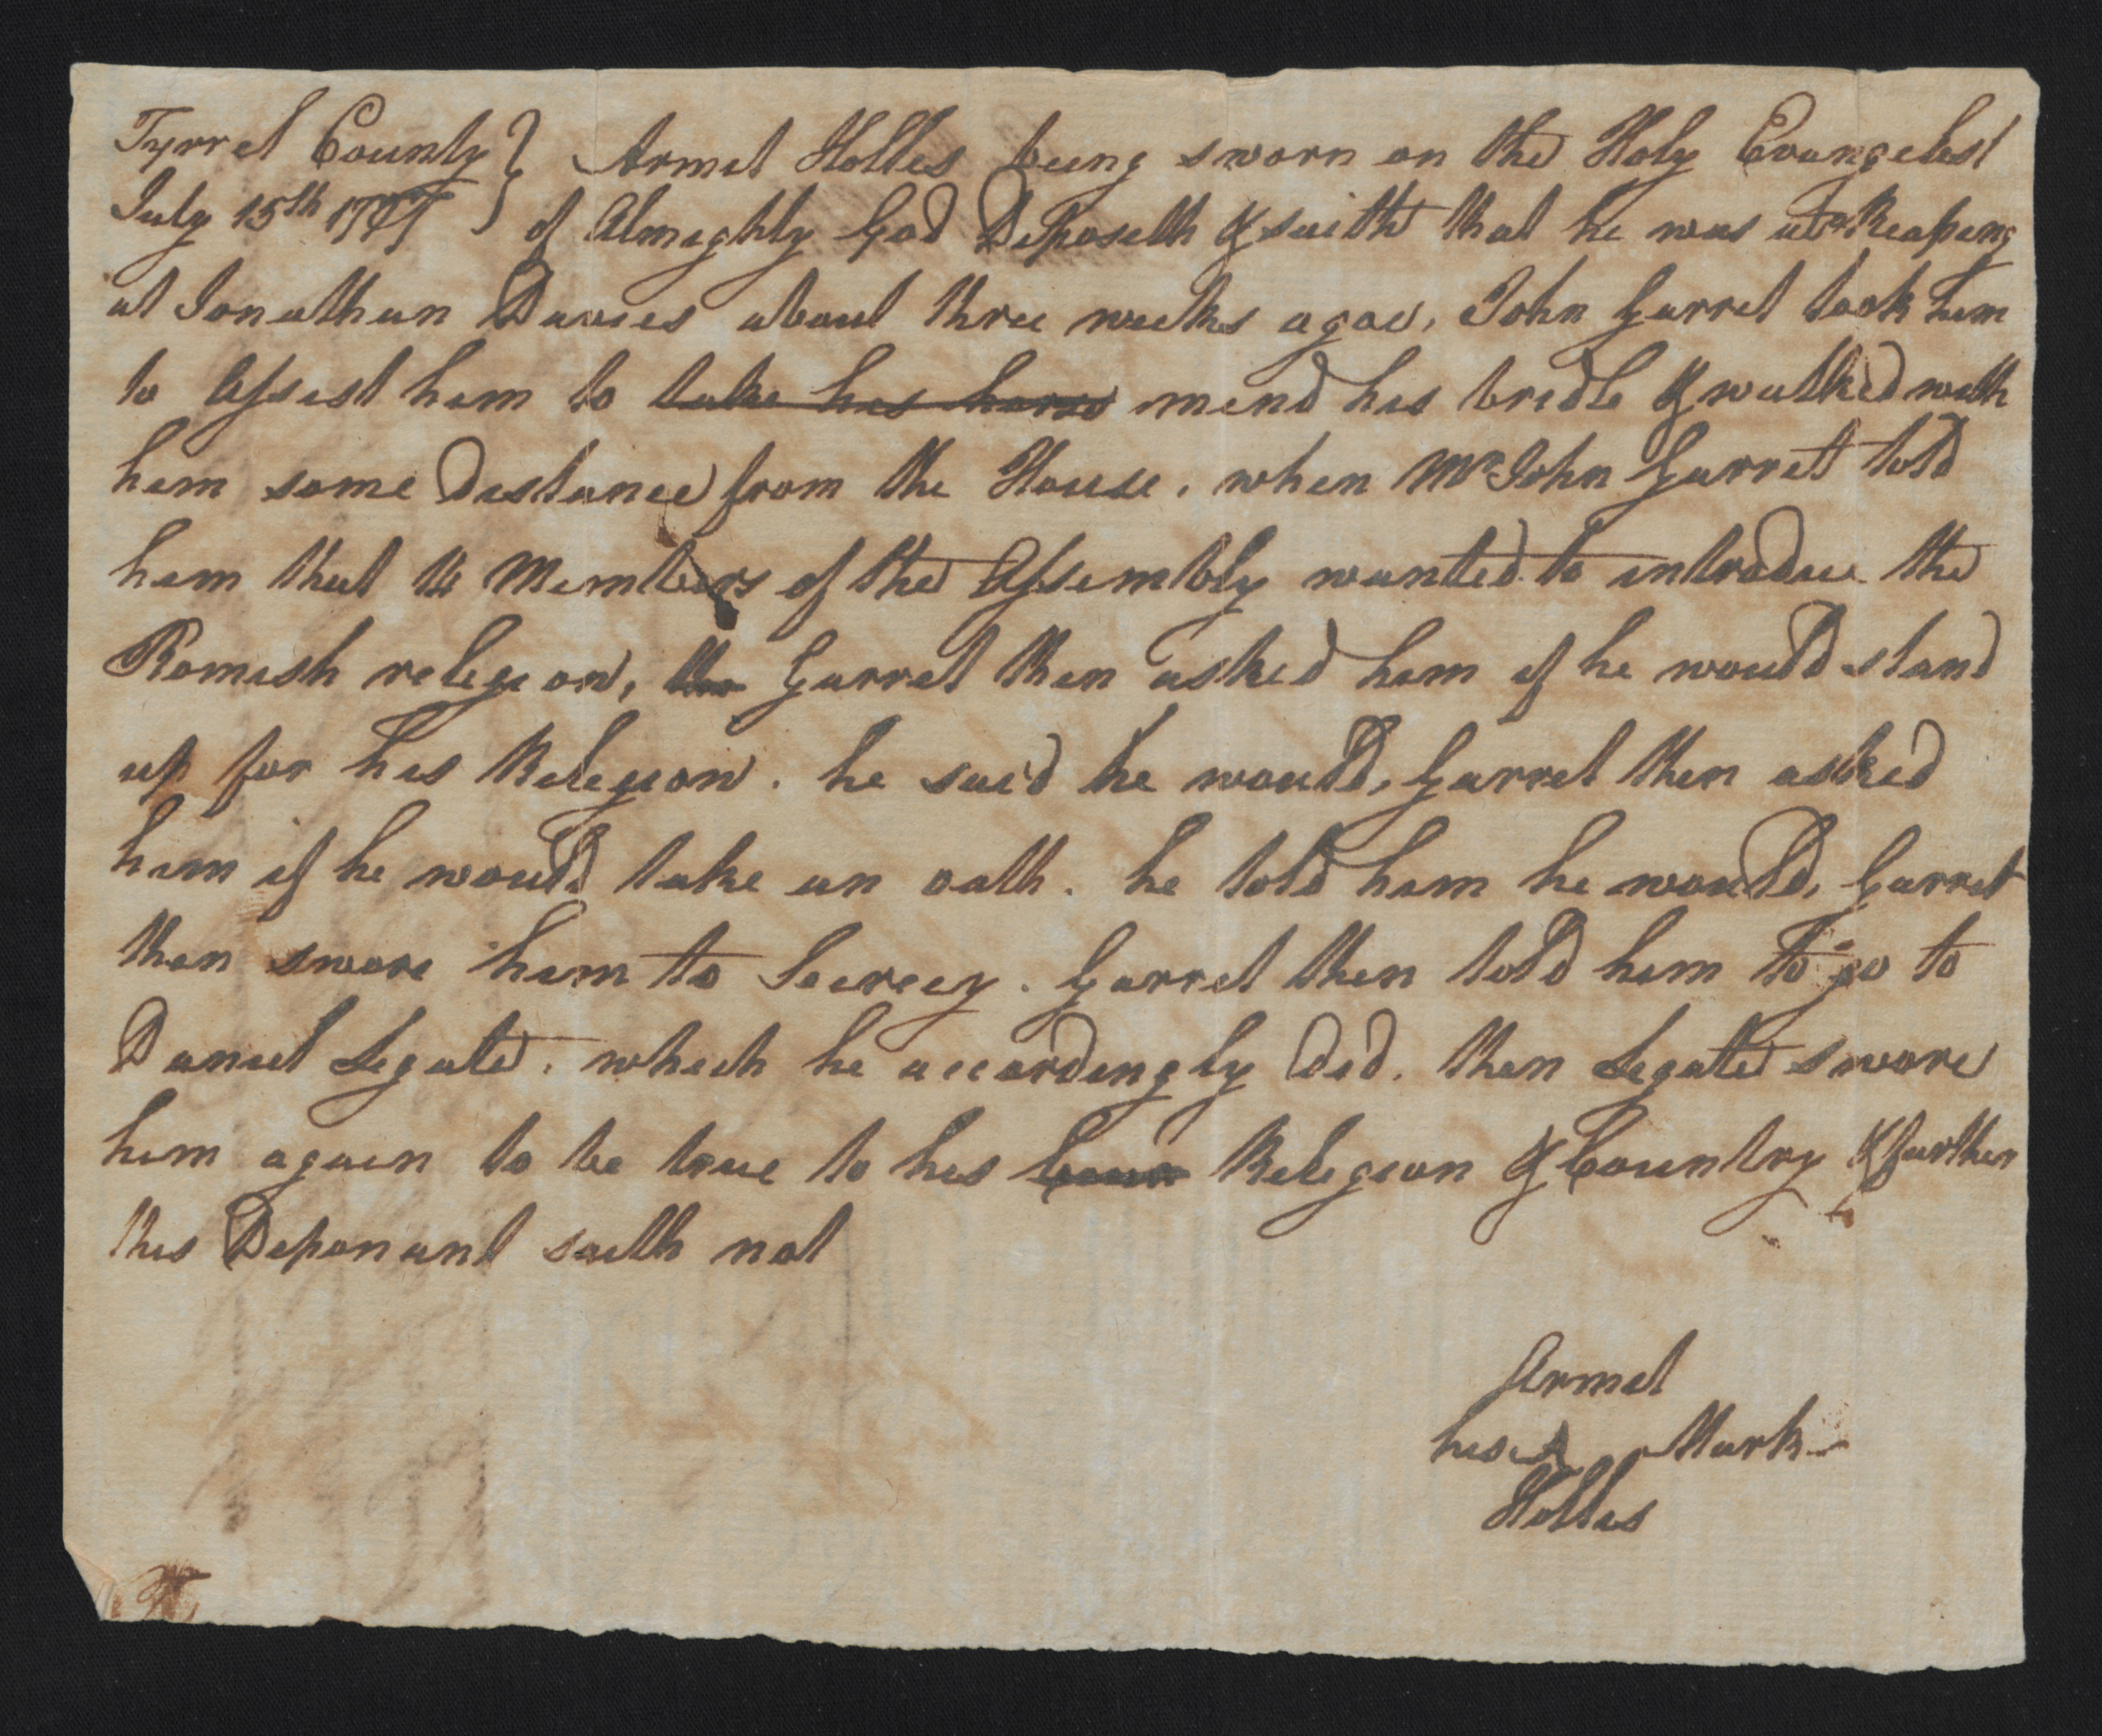 Deposition of Armel Holles, 15 July 1777, page 1